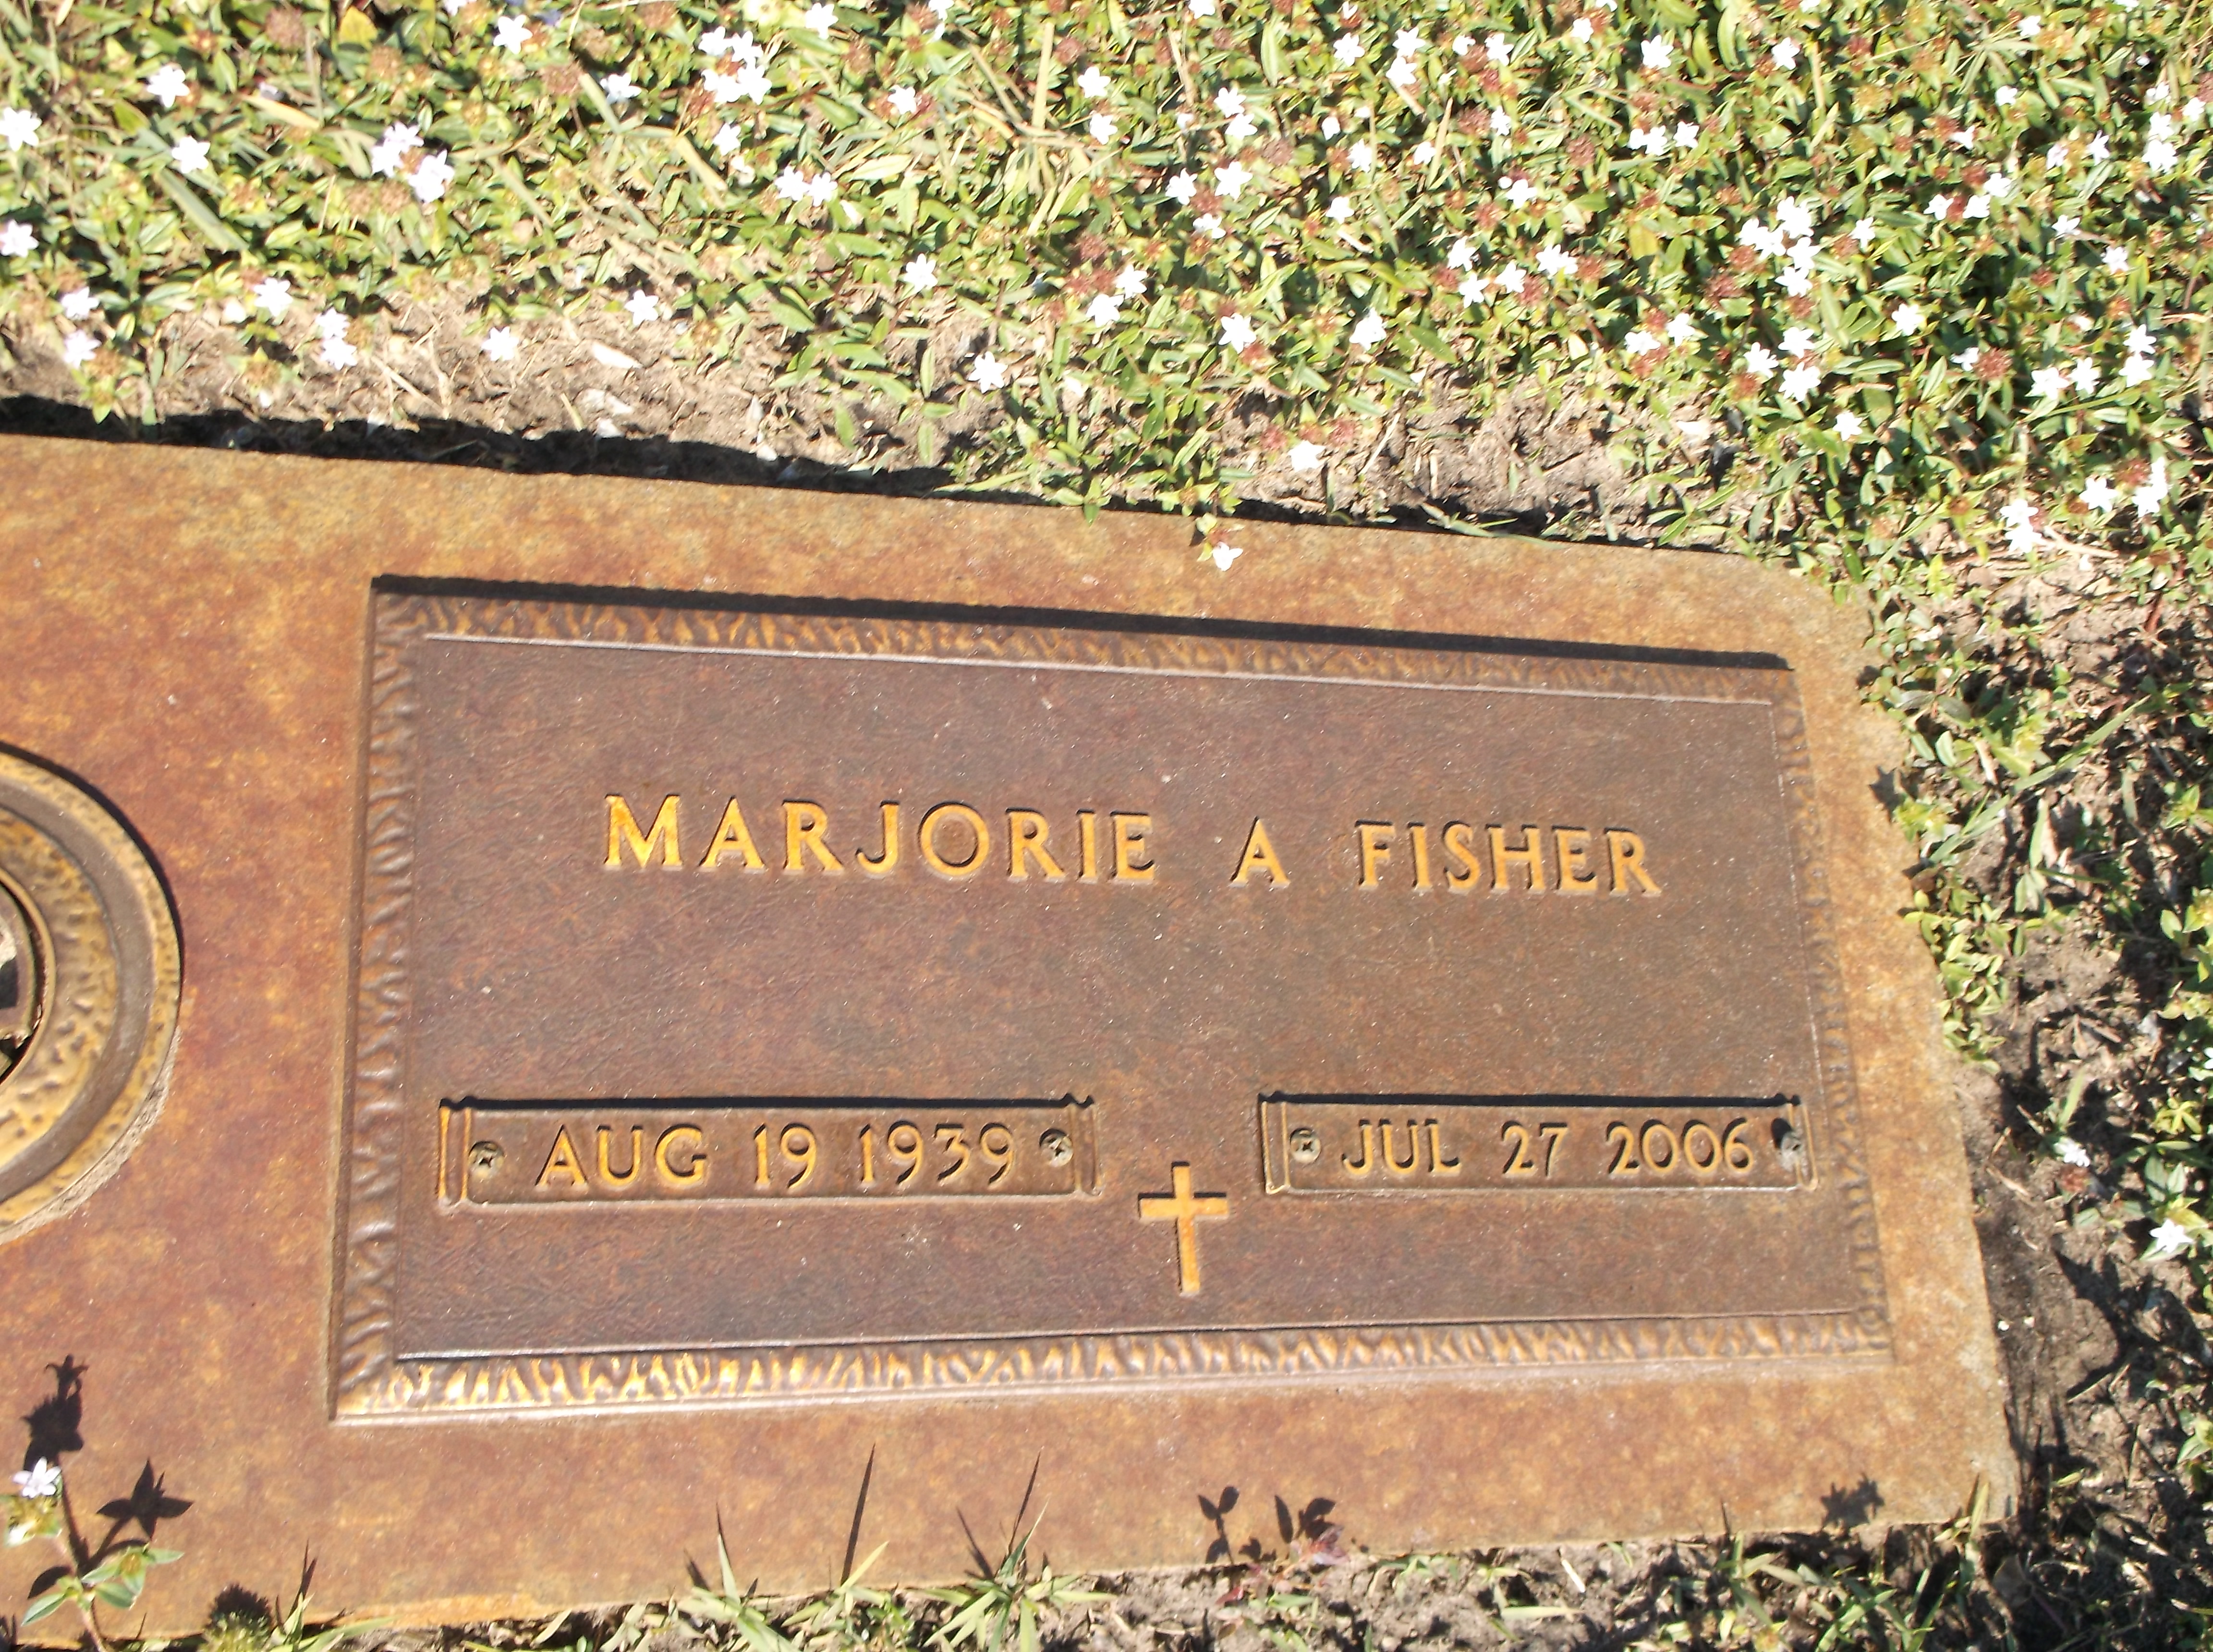 Marjorie A Fisher